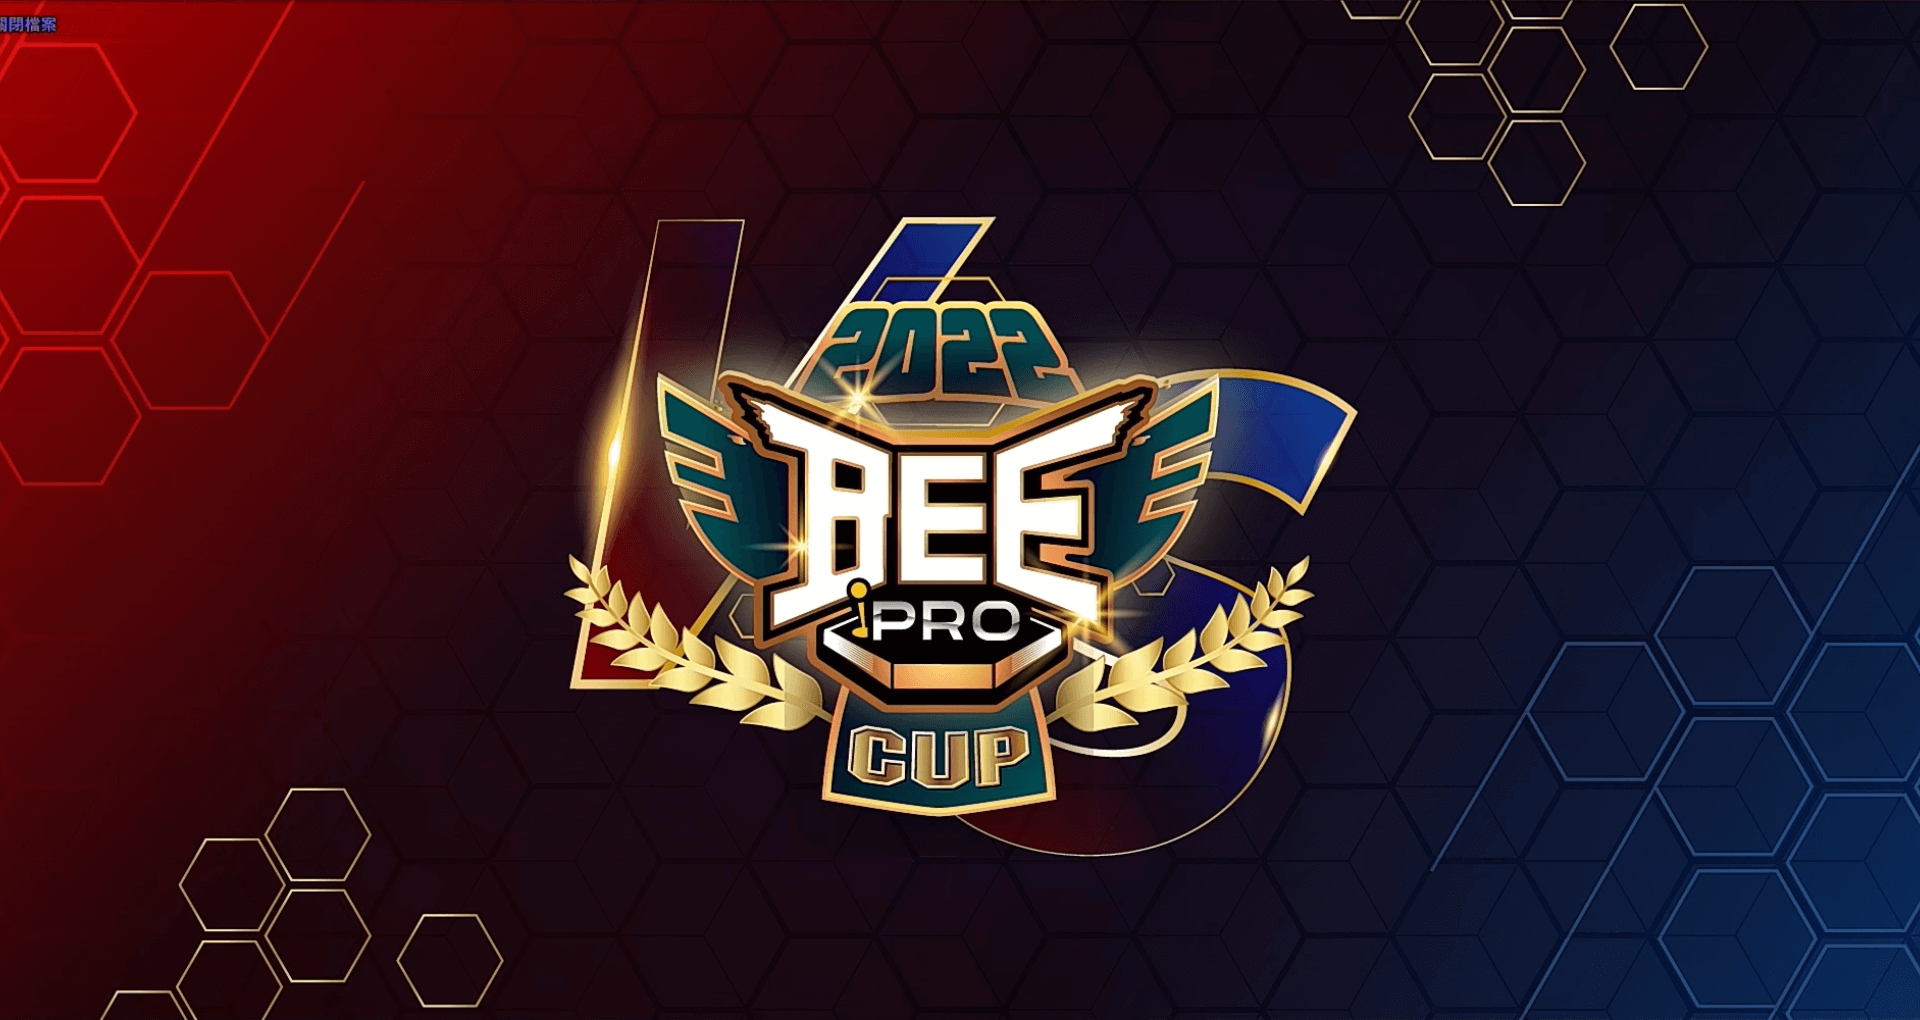 DBFZ at BeePro Cup 2022: Japanese in Taiwan